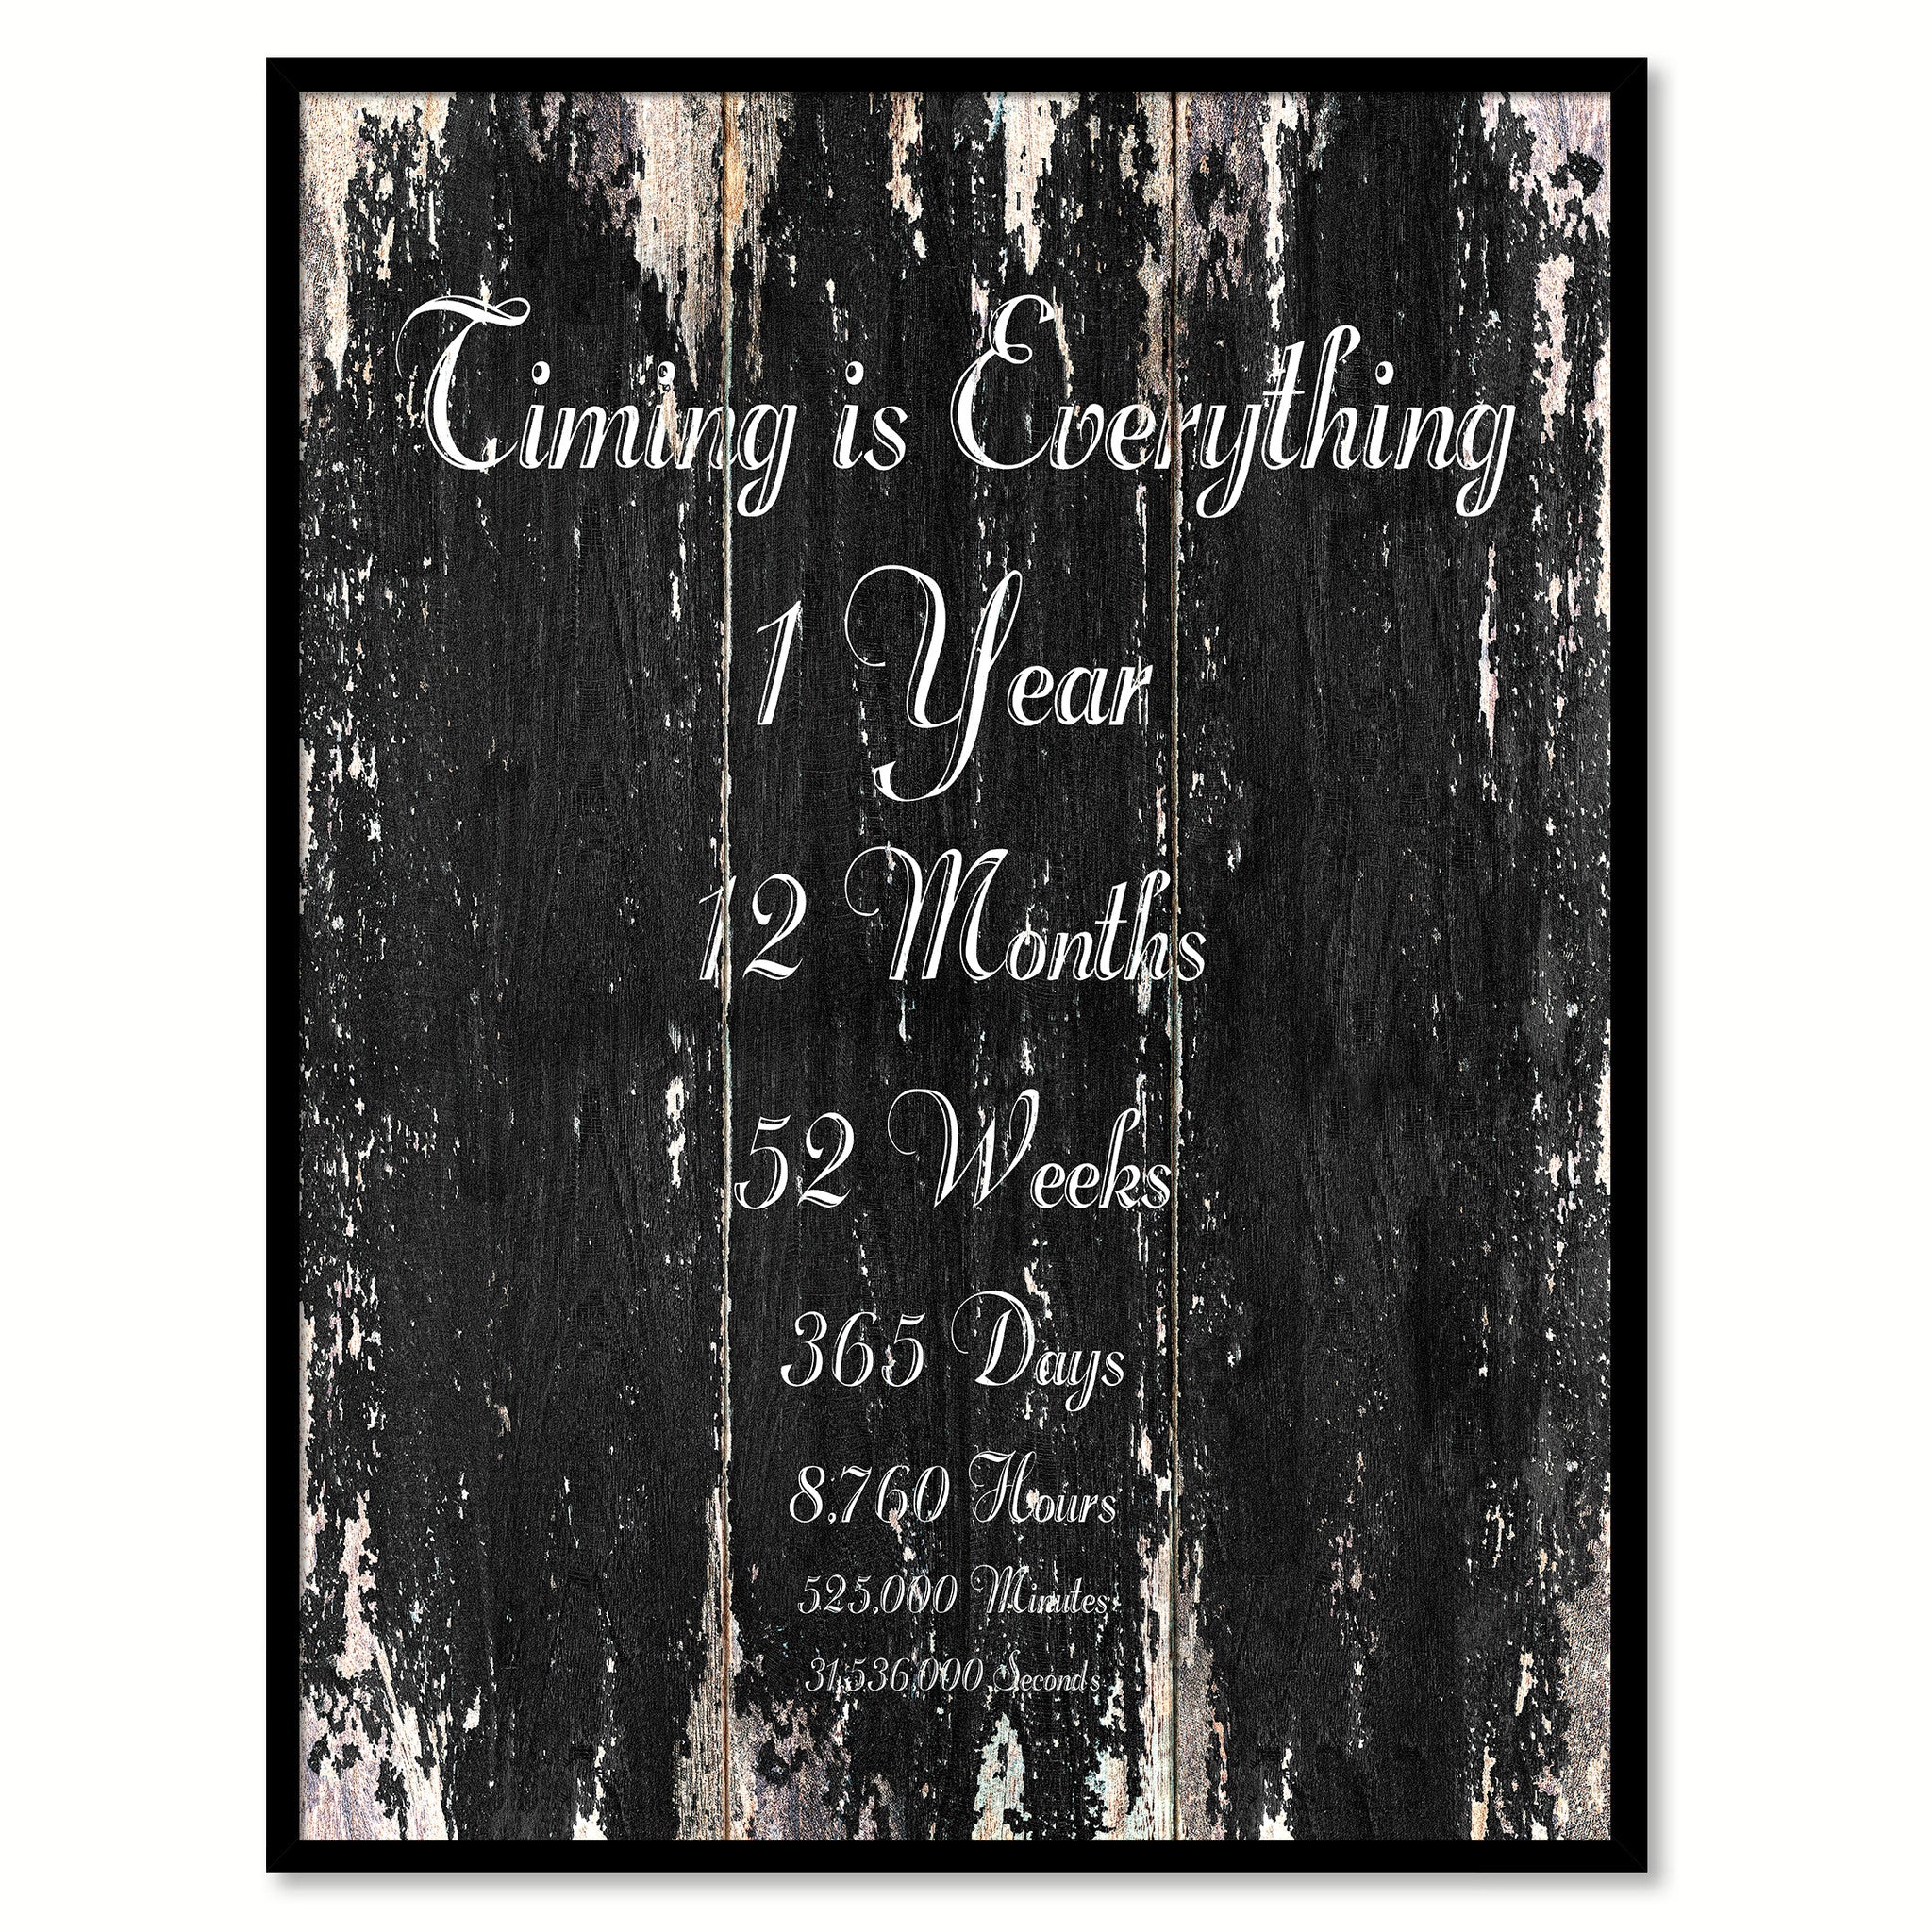 Timing Is Everything 1 Year 12 Months 52 Weeks 365 Days 8 760 Hours 525 000 Minutes 31 536 000 Seconds Inspirational Motivation Quote Saying Decorative Home Decor Wall Art Gift Ideas Spotcolorframe